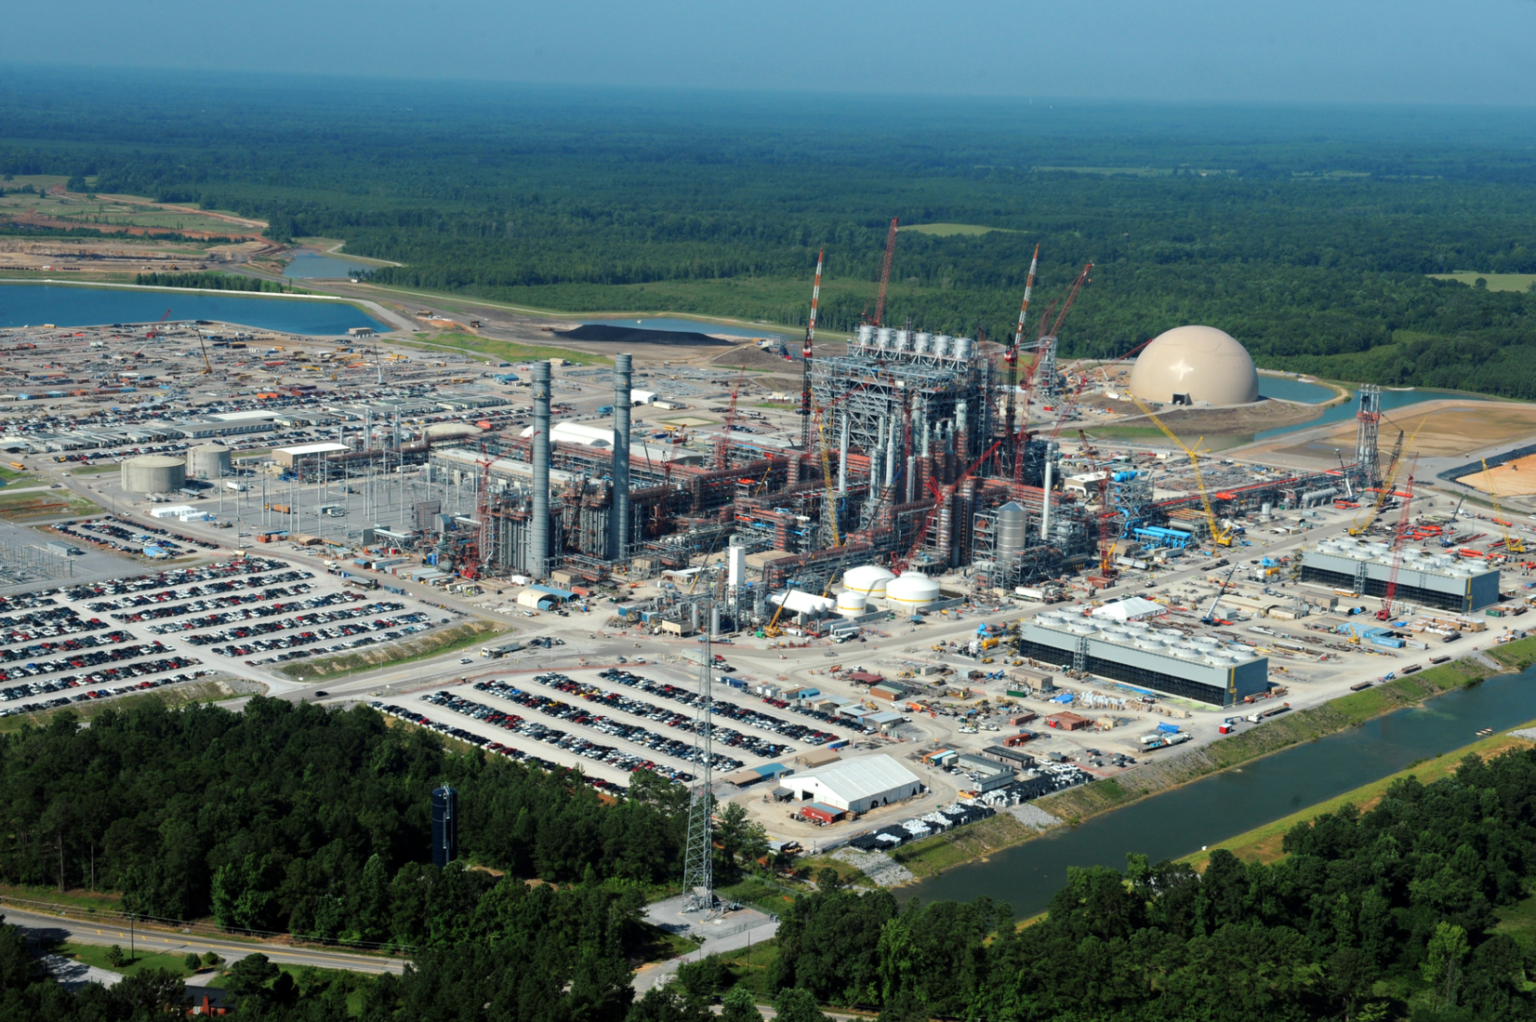 A massive coal gasification site under construction amid wooded areas